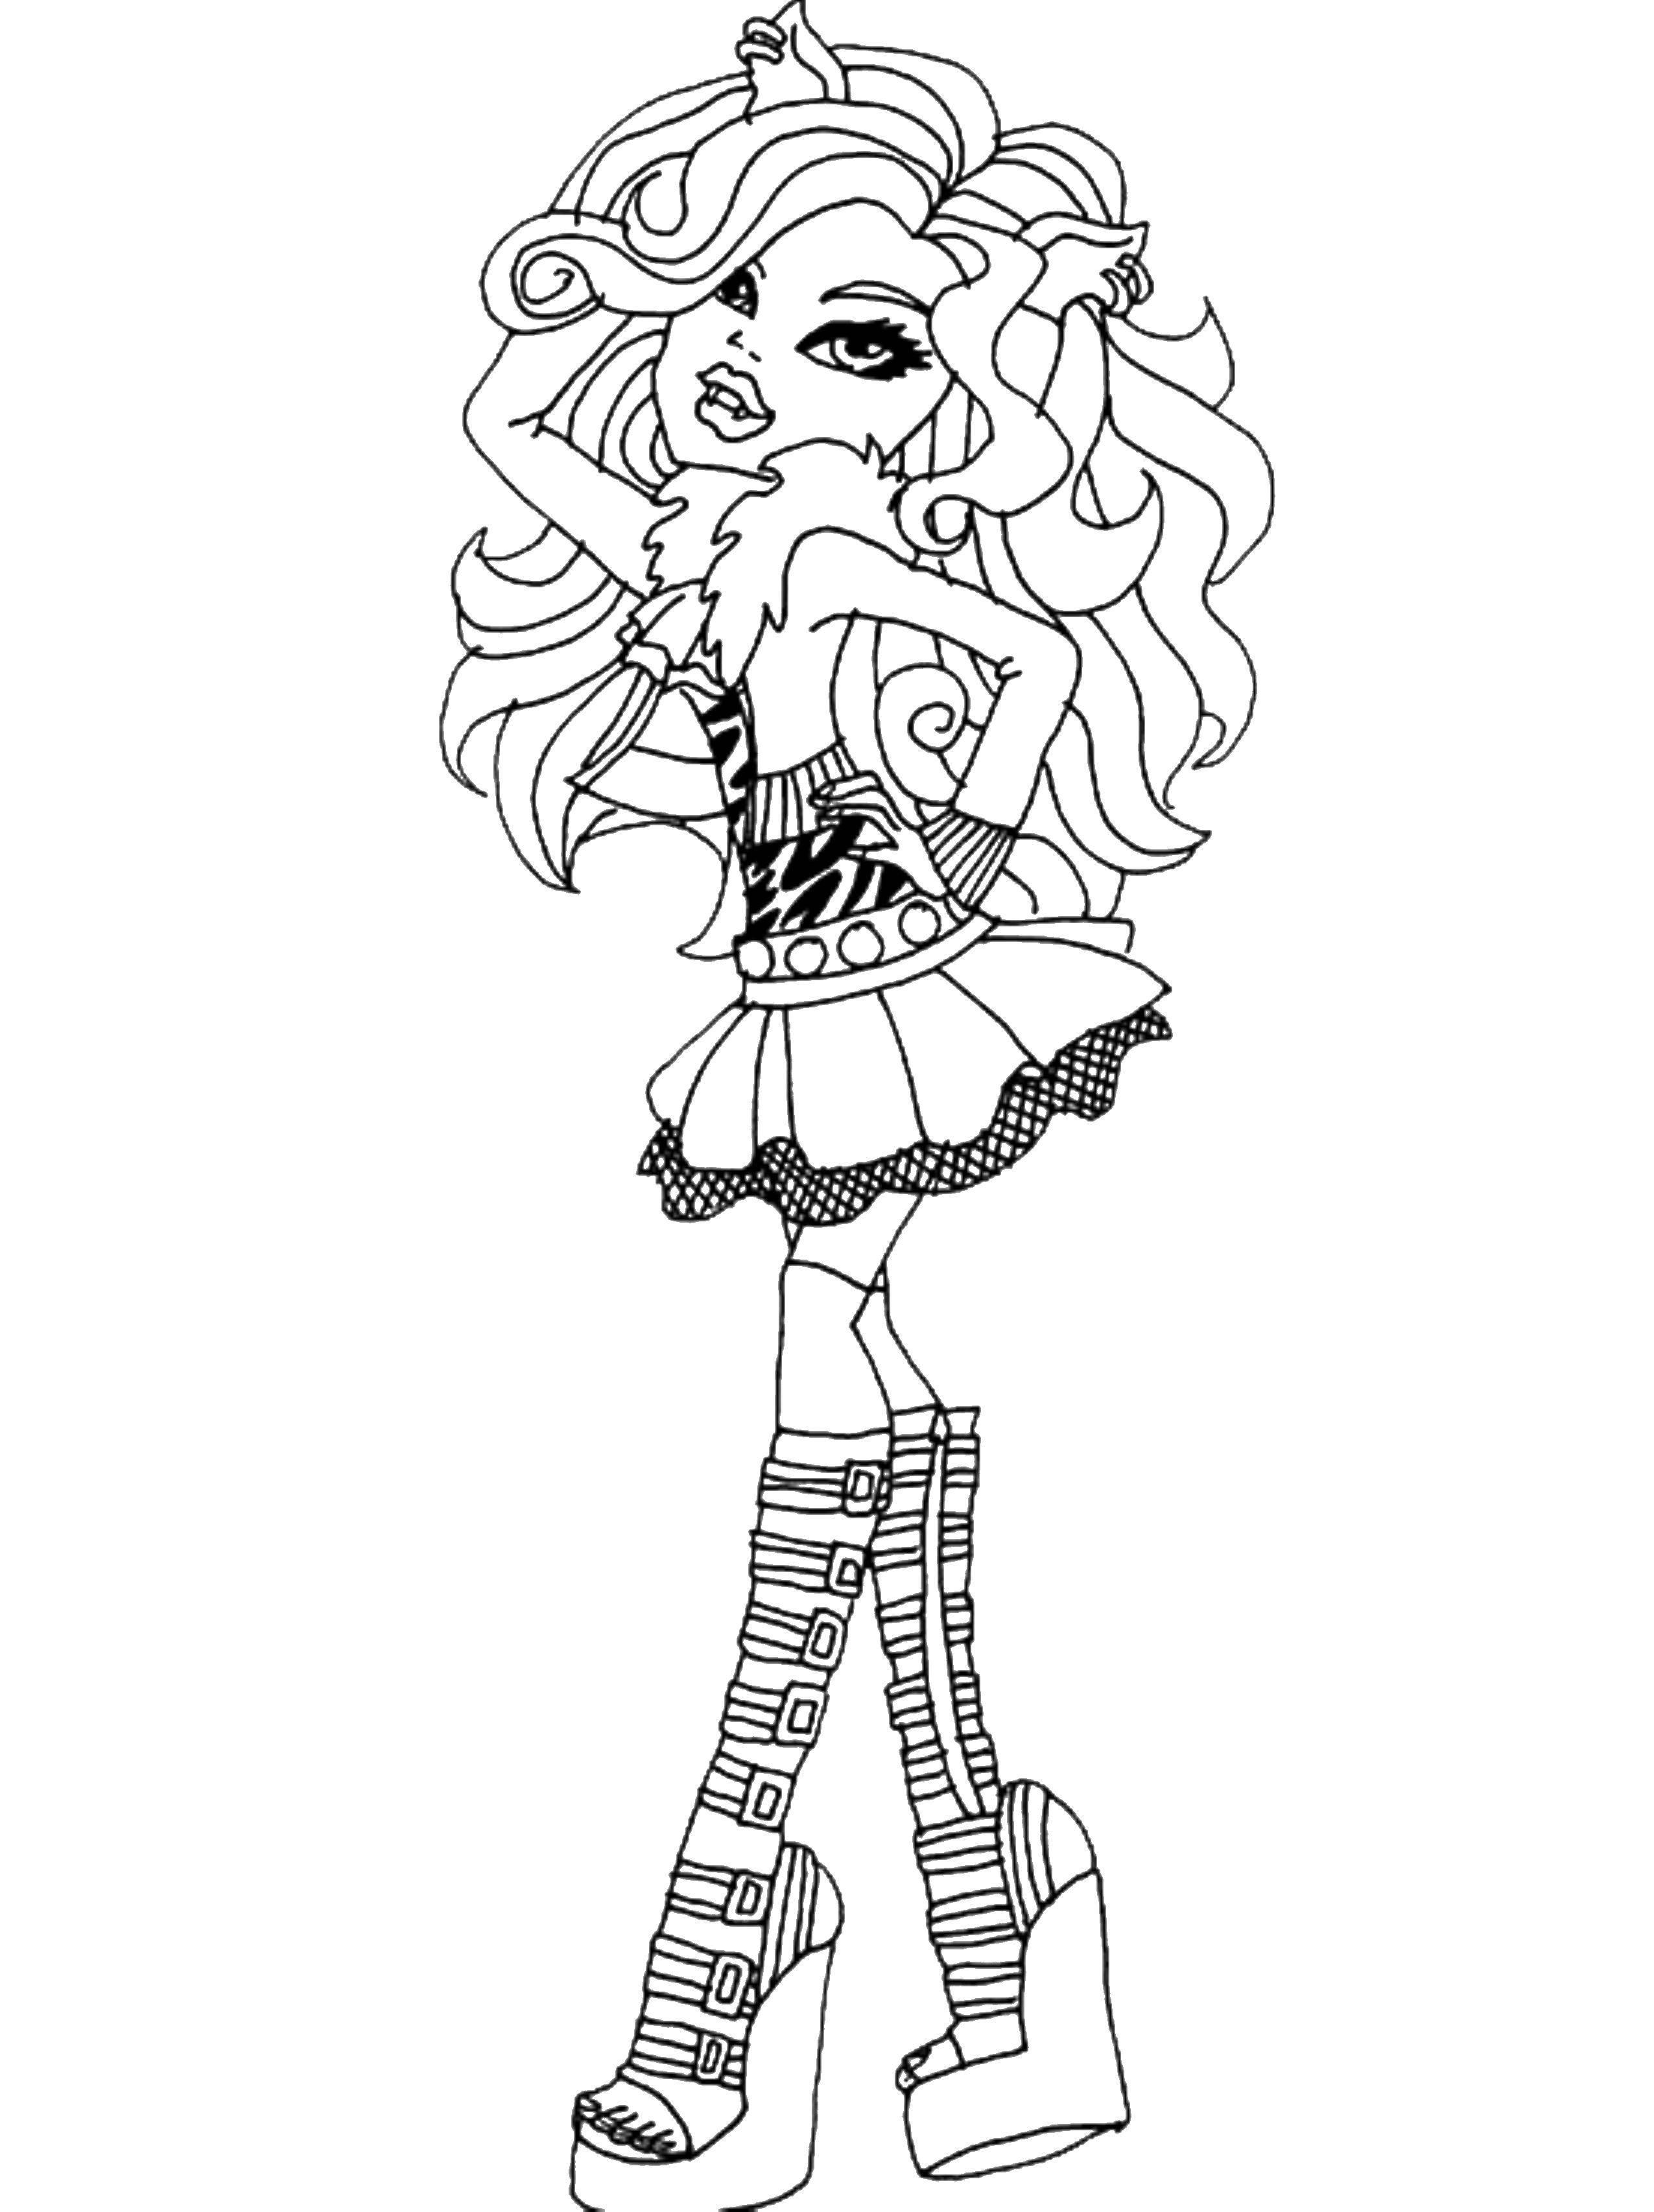 Coloring Clawdeen wolf. Category Monster high. Tags:  Clawdeen wolf, monster high.